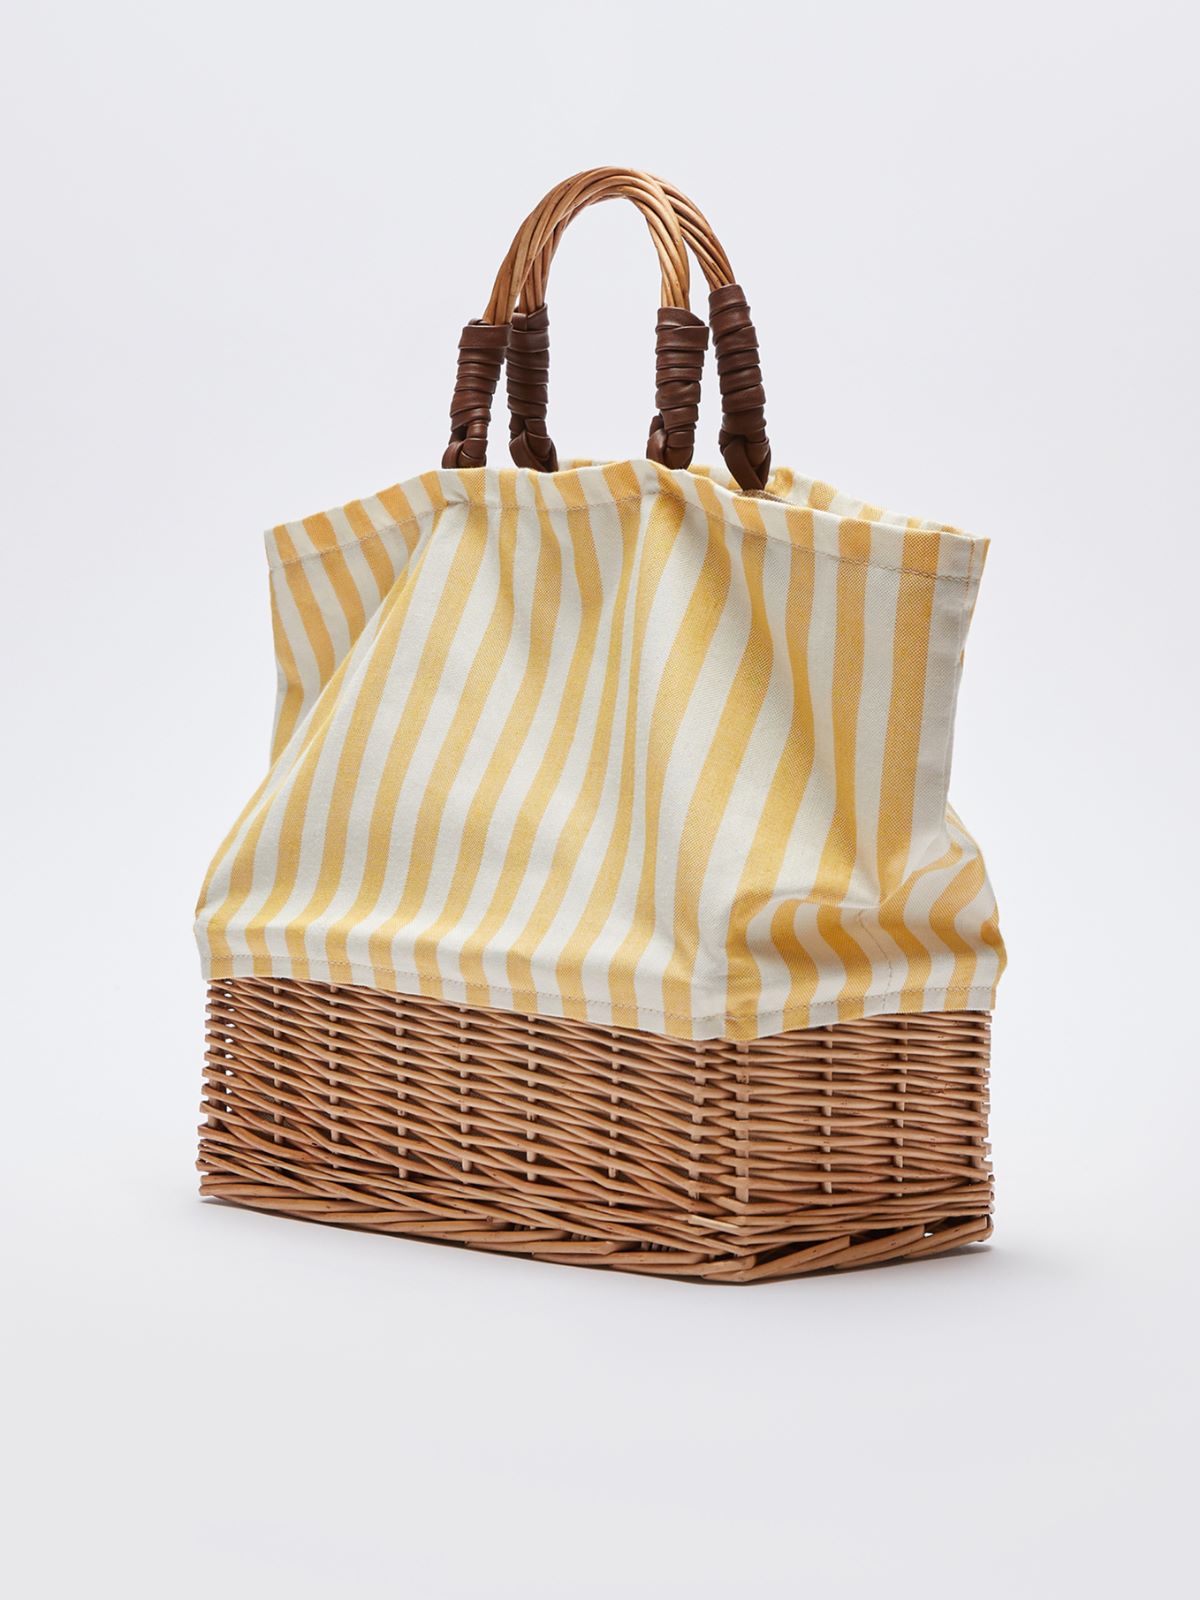 Bag in cotton and rattan - BRIGHT YELLOW - Weekend Max Mara - 2